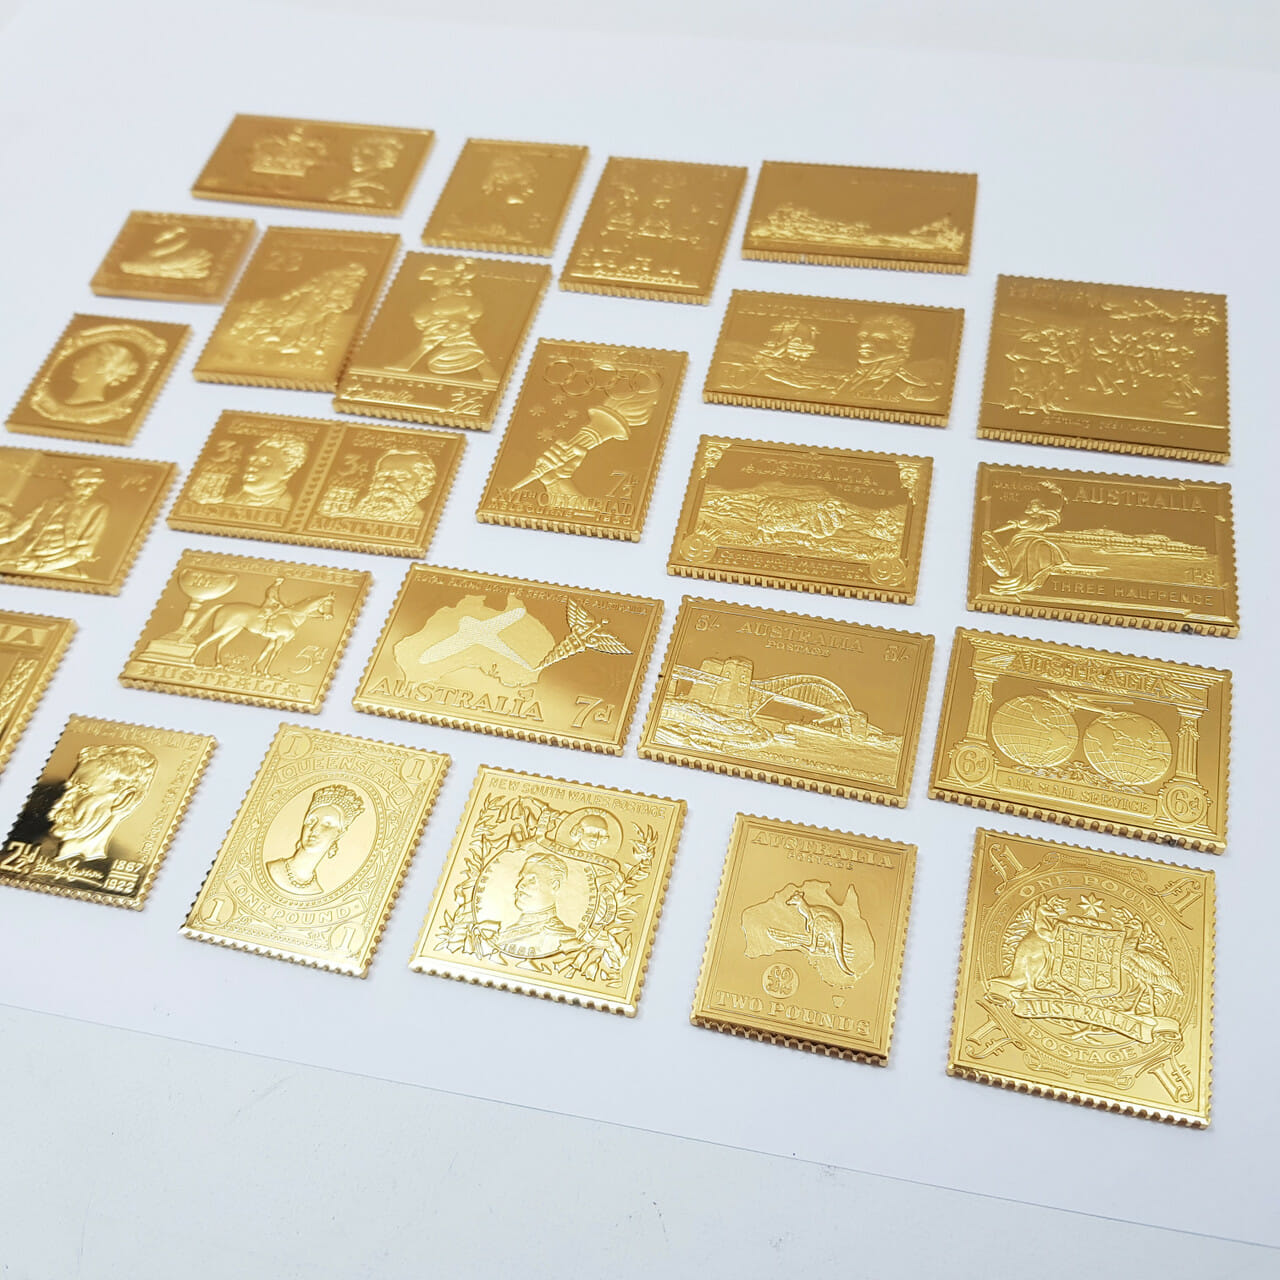 THE AUSTRALIAN COLLECTION - 25 PIECE 24CT GOLD PLATED SILVER STAMP SET #53130